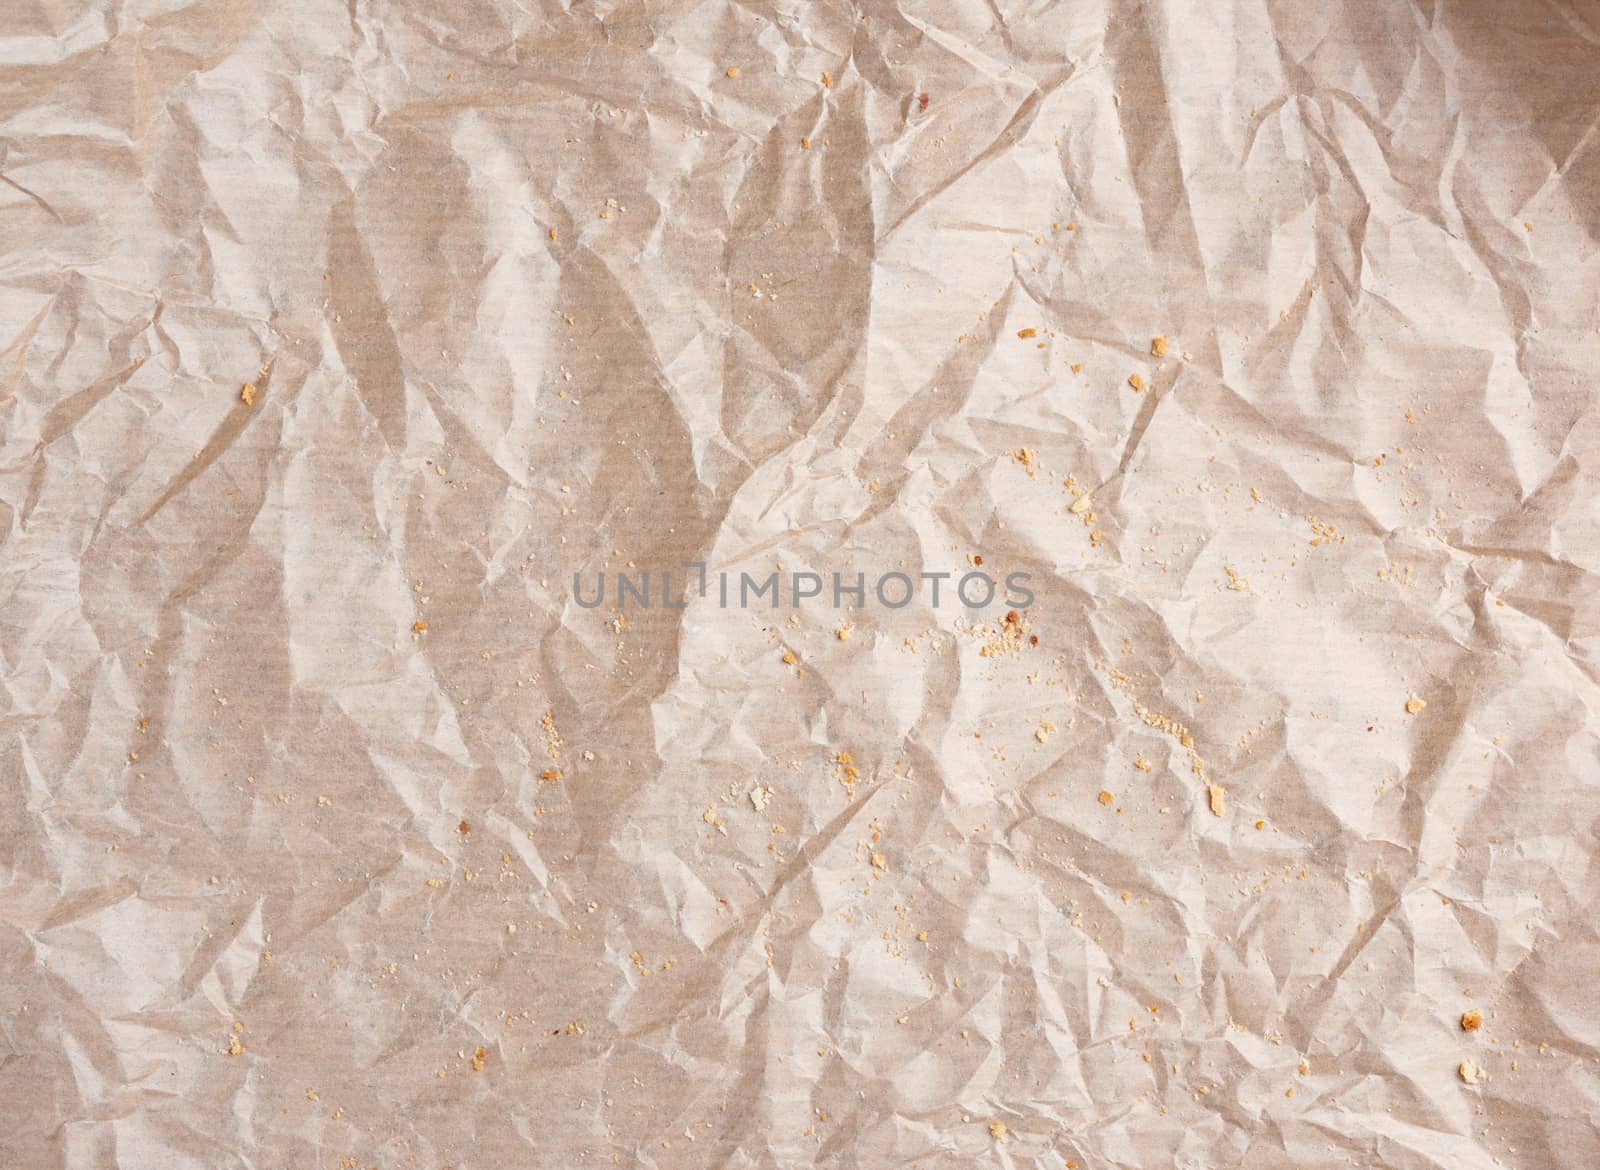 crumpled brown parchment paper with bread crumbs, full frame